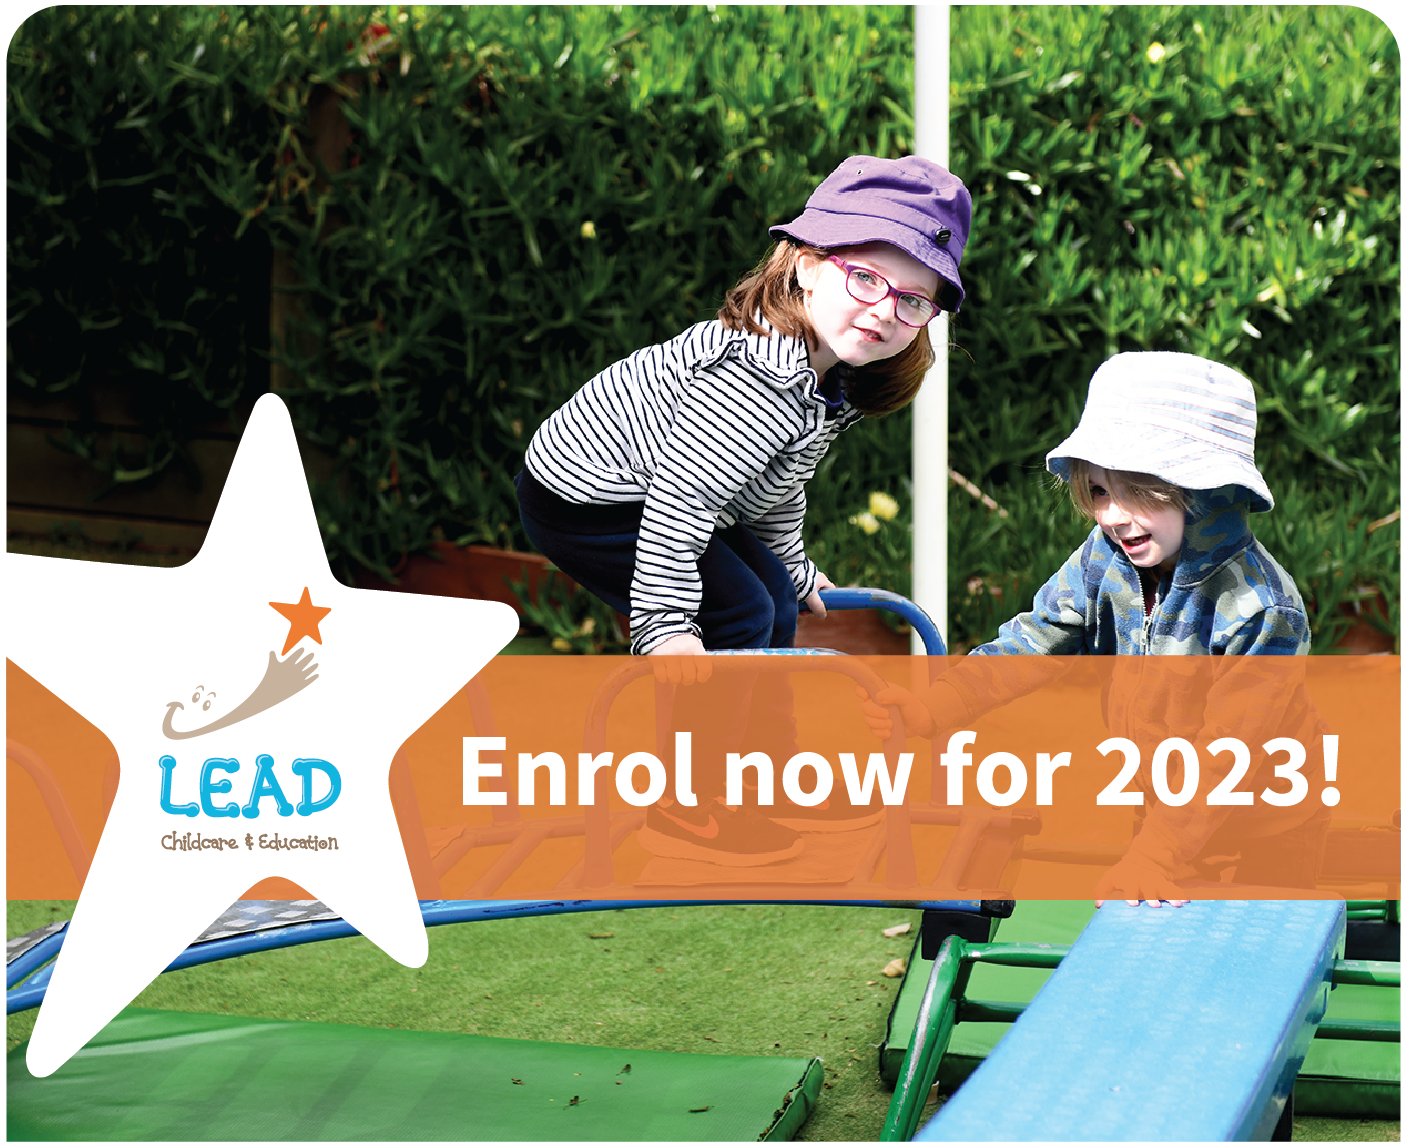 Why choose LEAD Childcare in 2023?